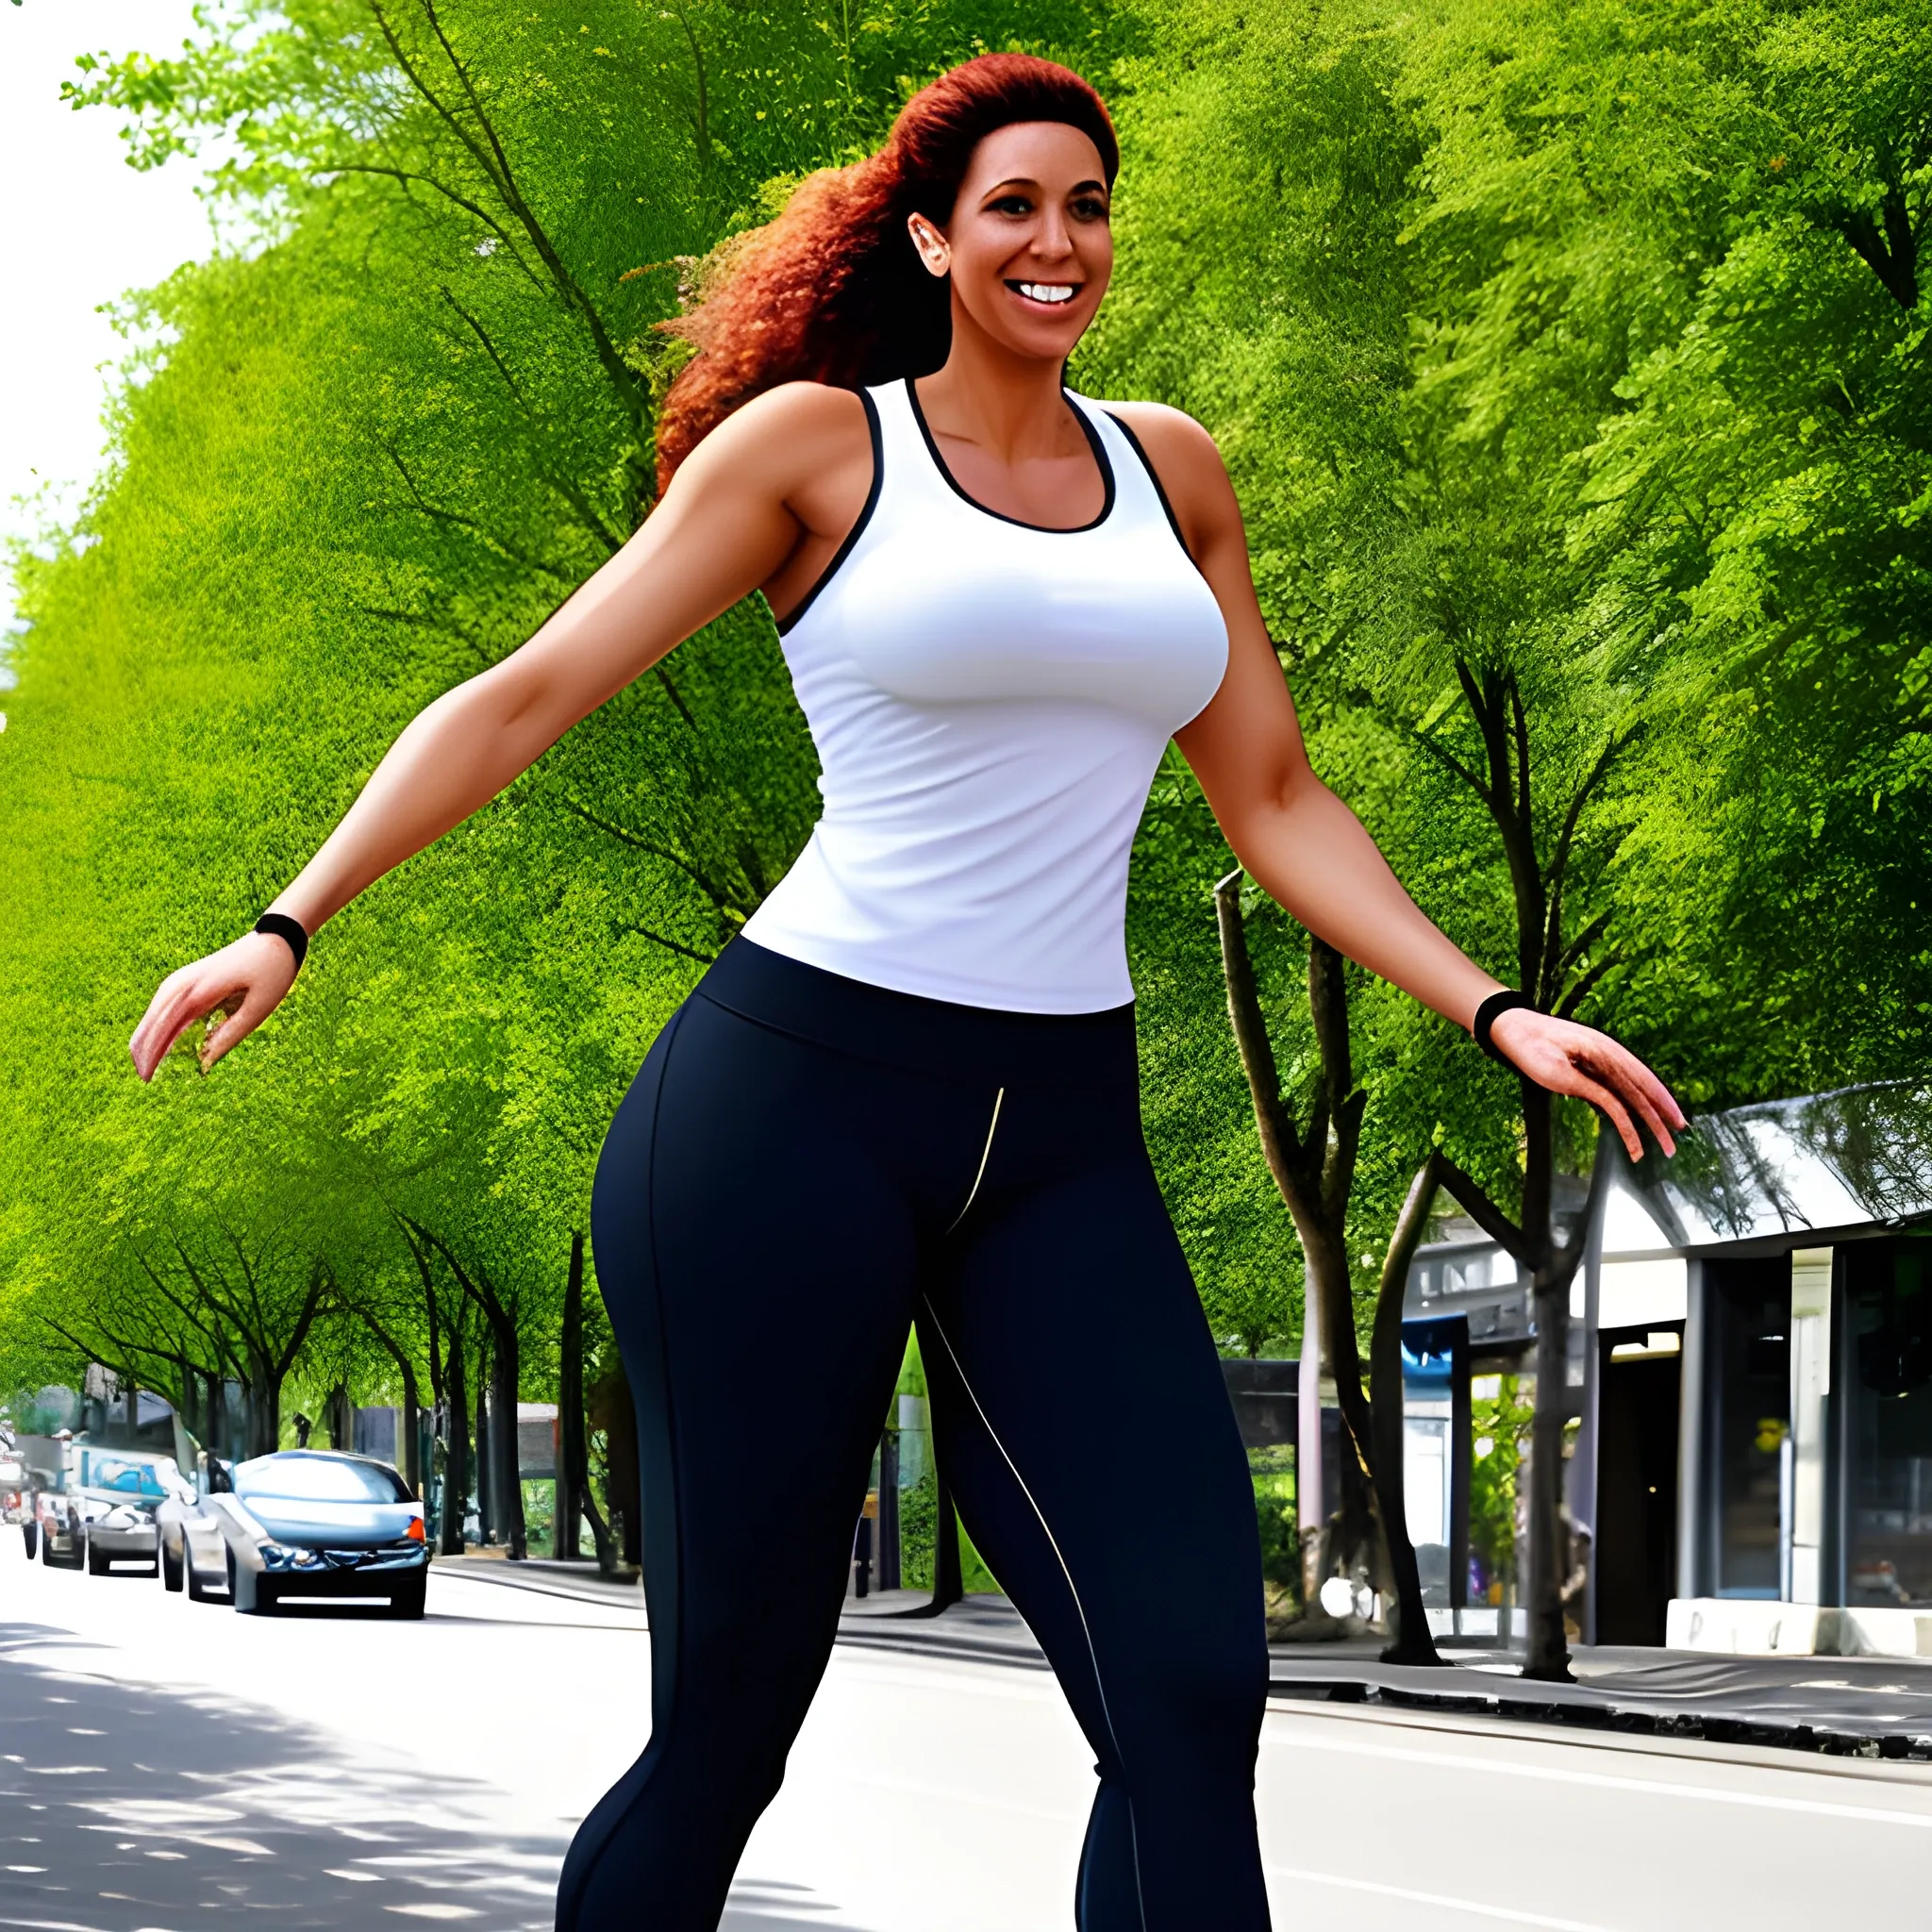 huge 250 cm tall fullslim strong sporty musculous and curvy kind